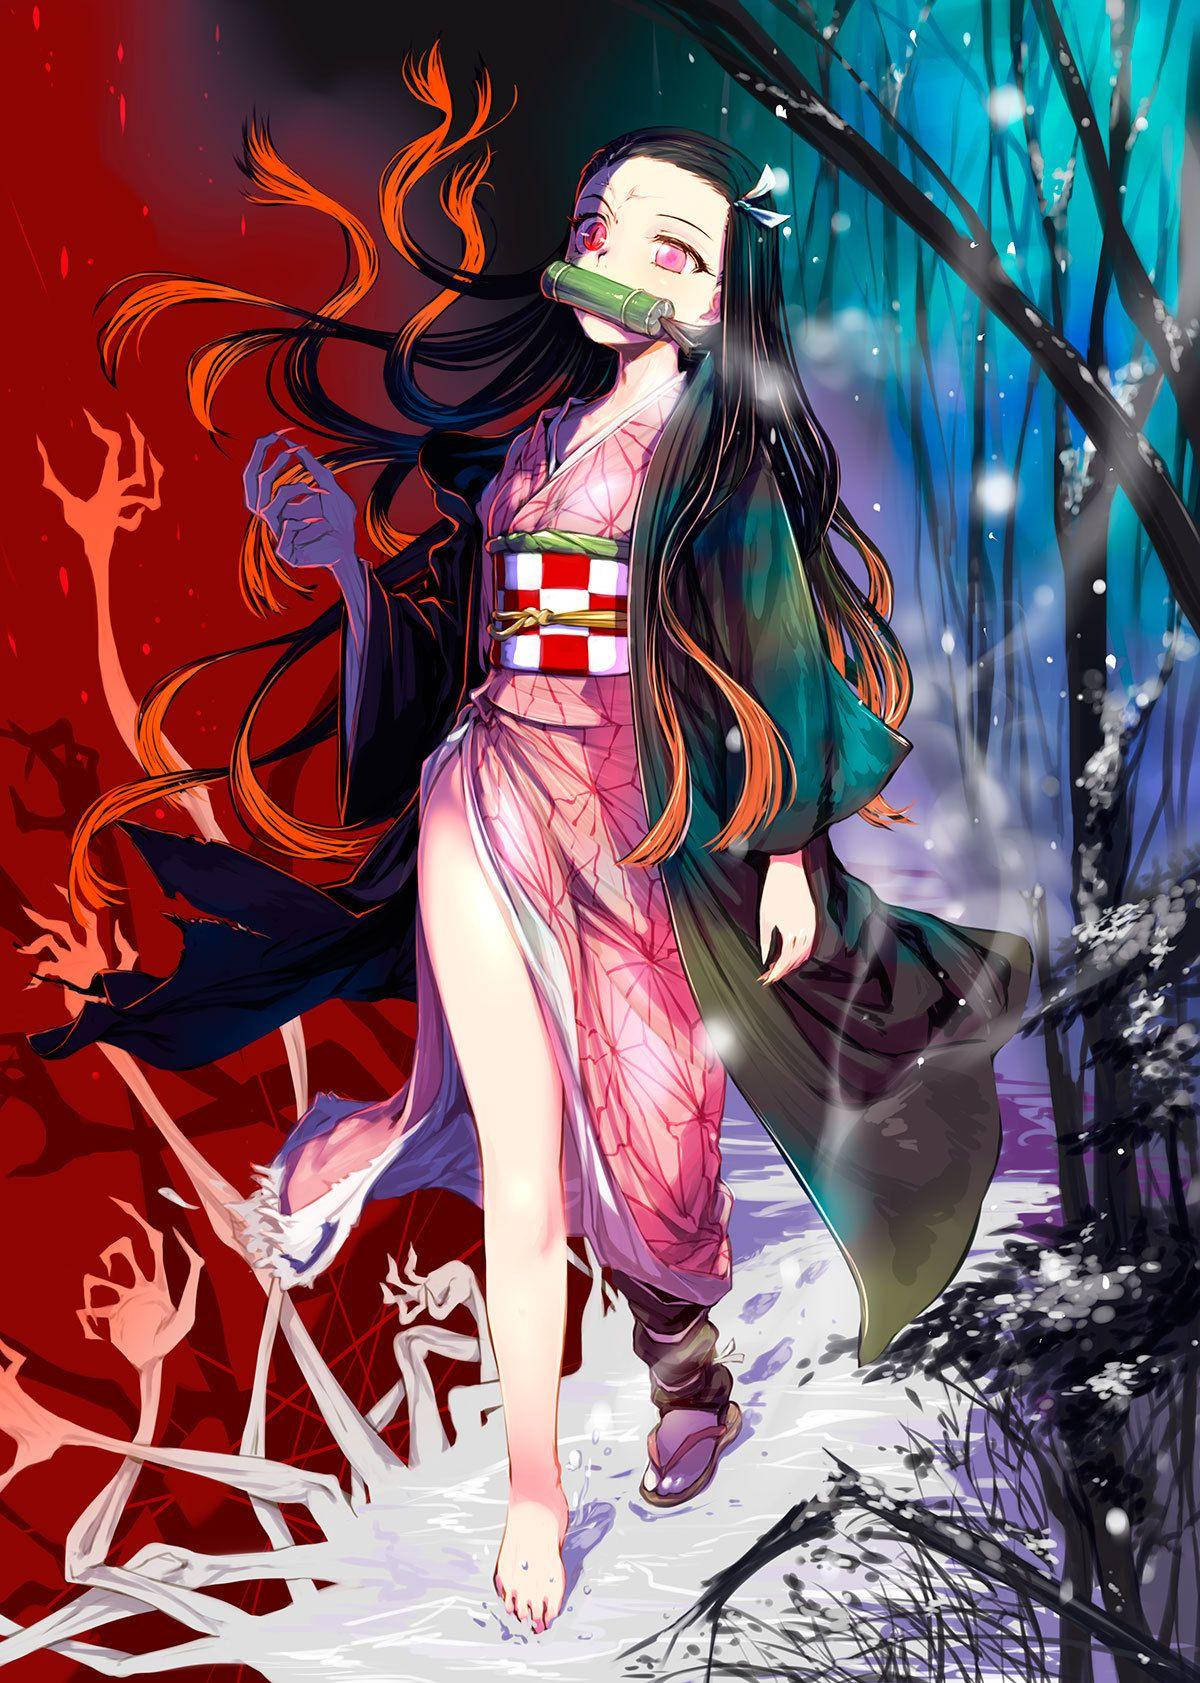 Enjoy the beauty of Nezuko every day with this exclusive wallpaper for your iPhone Wallpaper